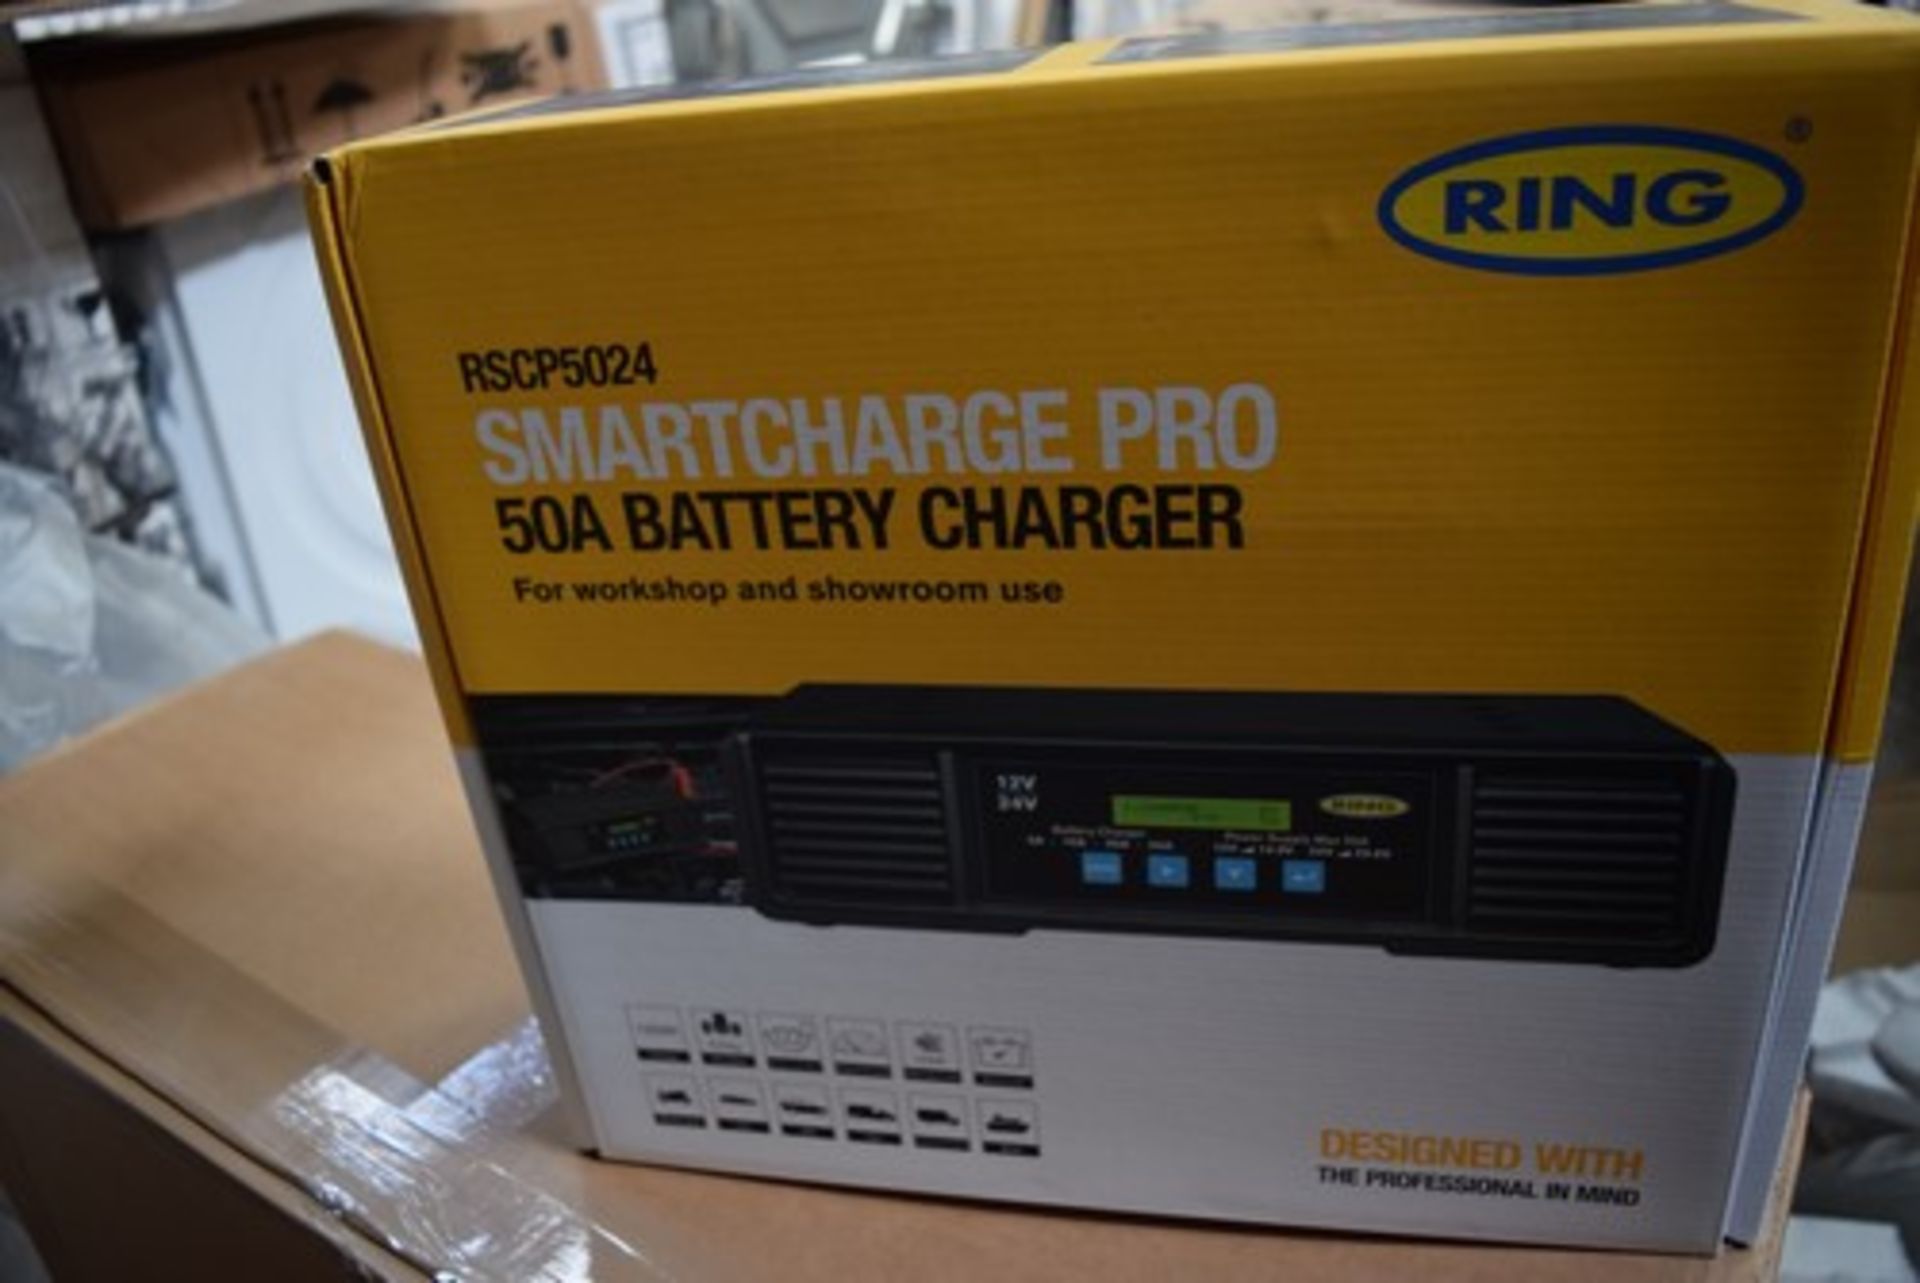 1 x Ring smart charge pro battery charger, Model RSCP 5024 - New in box (GS7) - Image 2 of 2